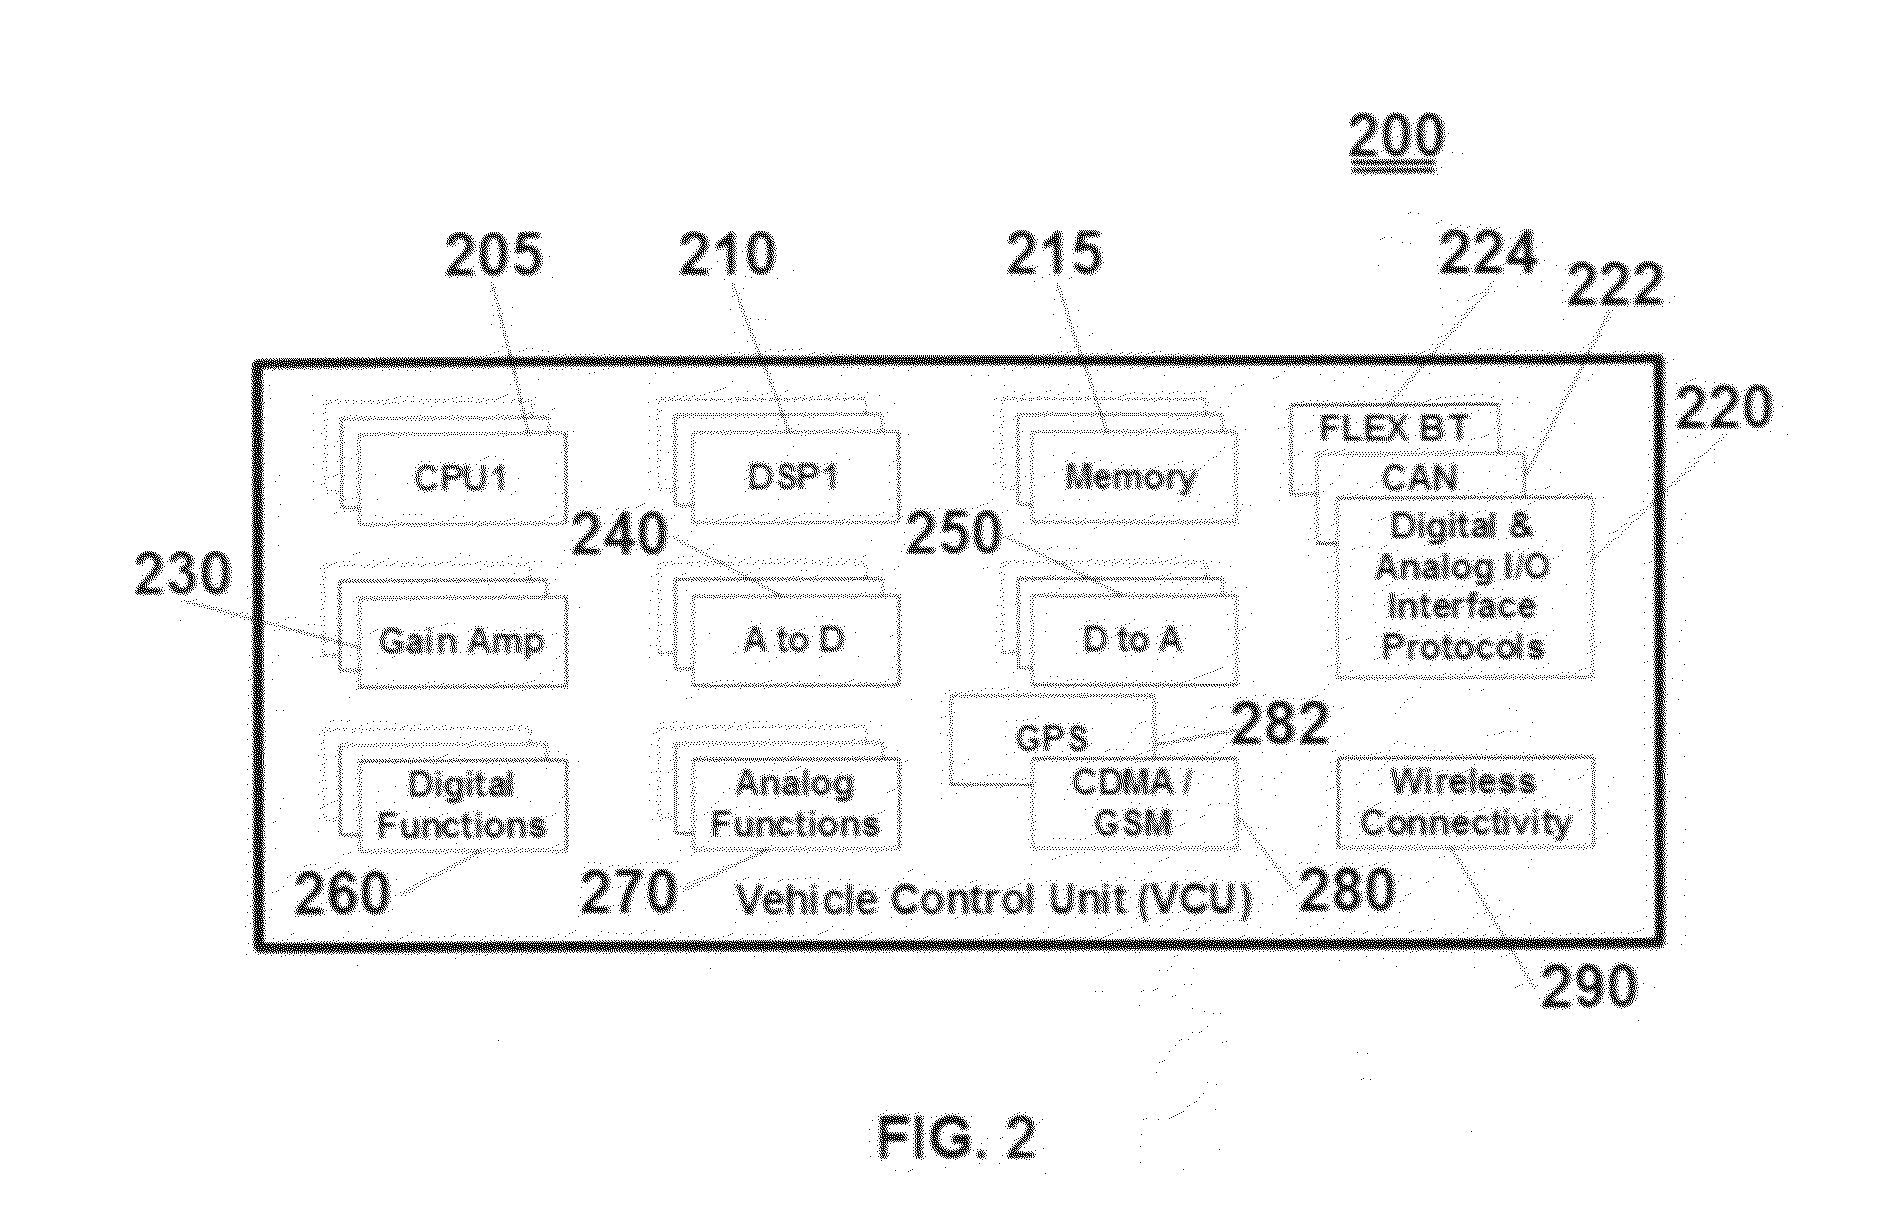 Method and apparatus for a vehicle control unit (VCU), Using current and historical instantaneous power usage data, to determine optimum power settings for a hybrid electric drive system